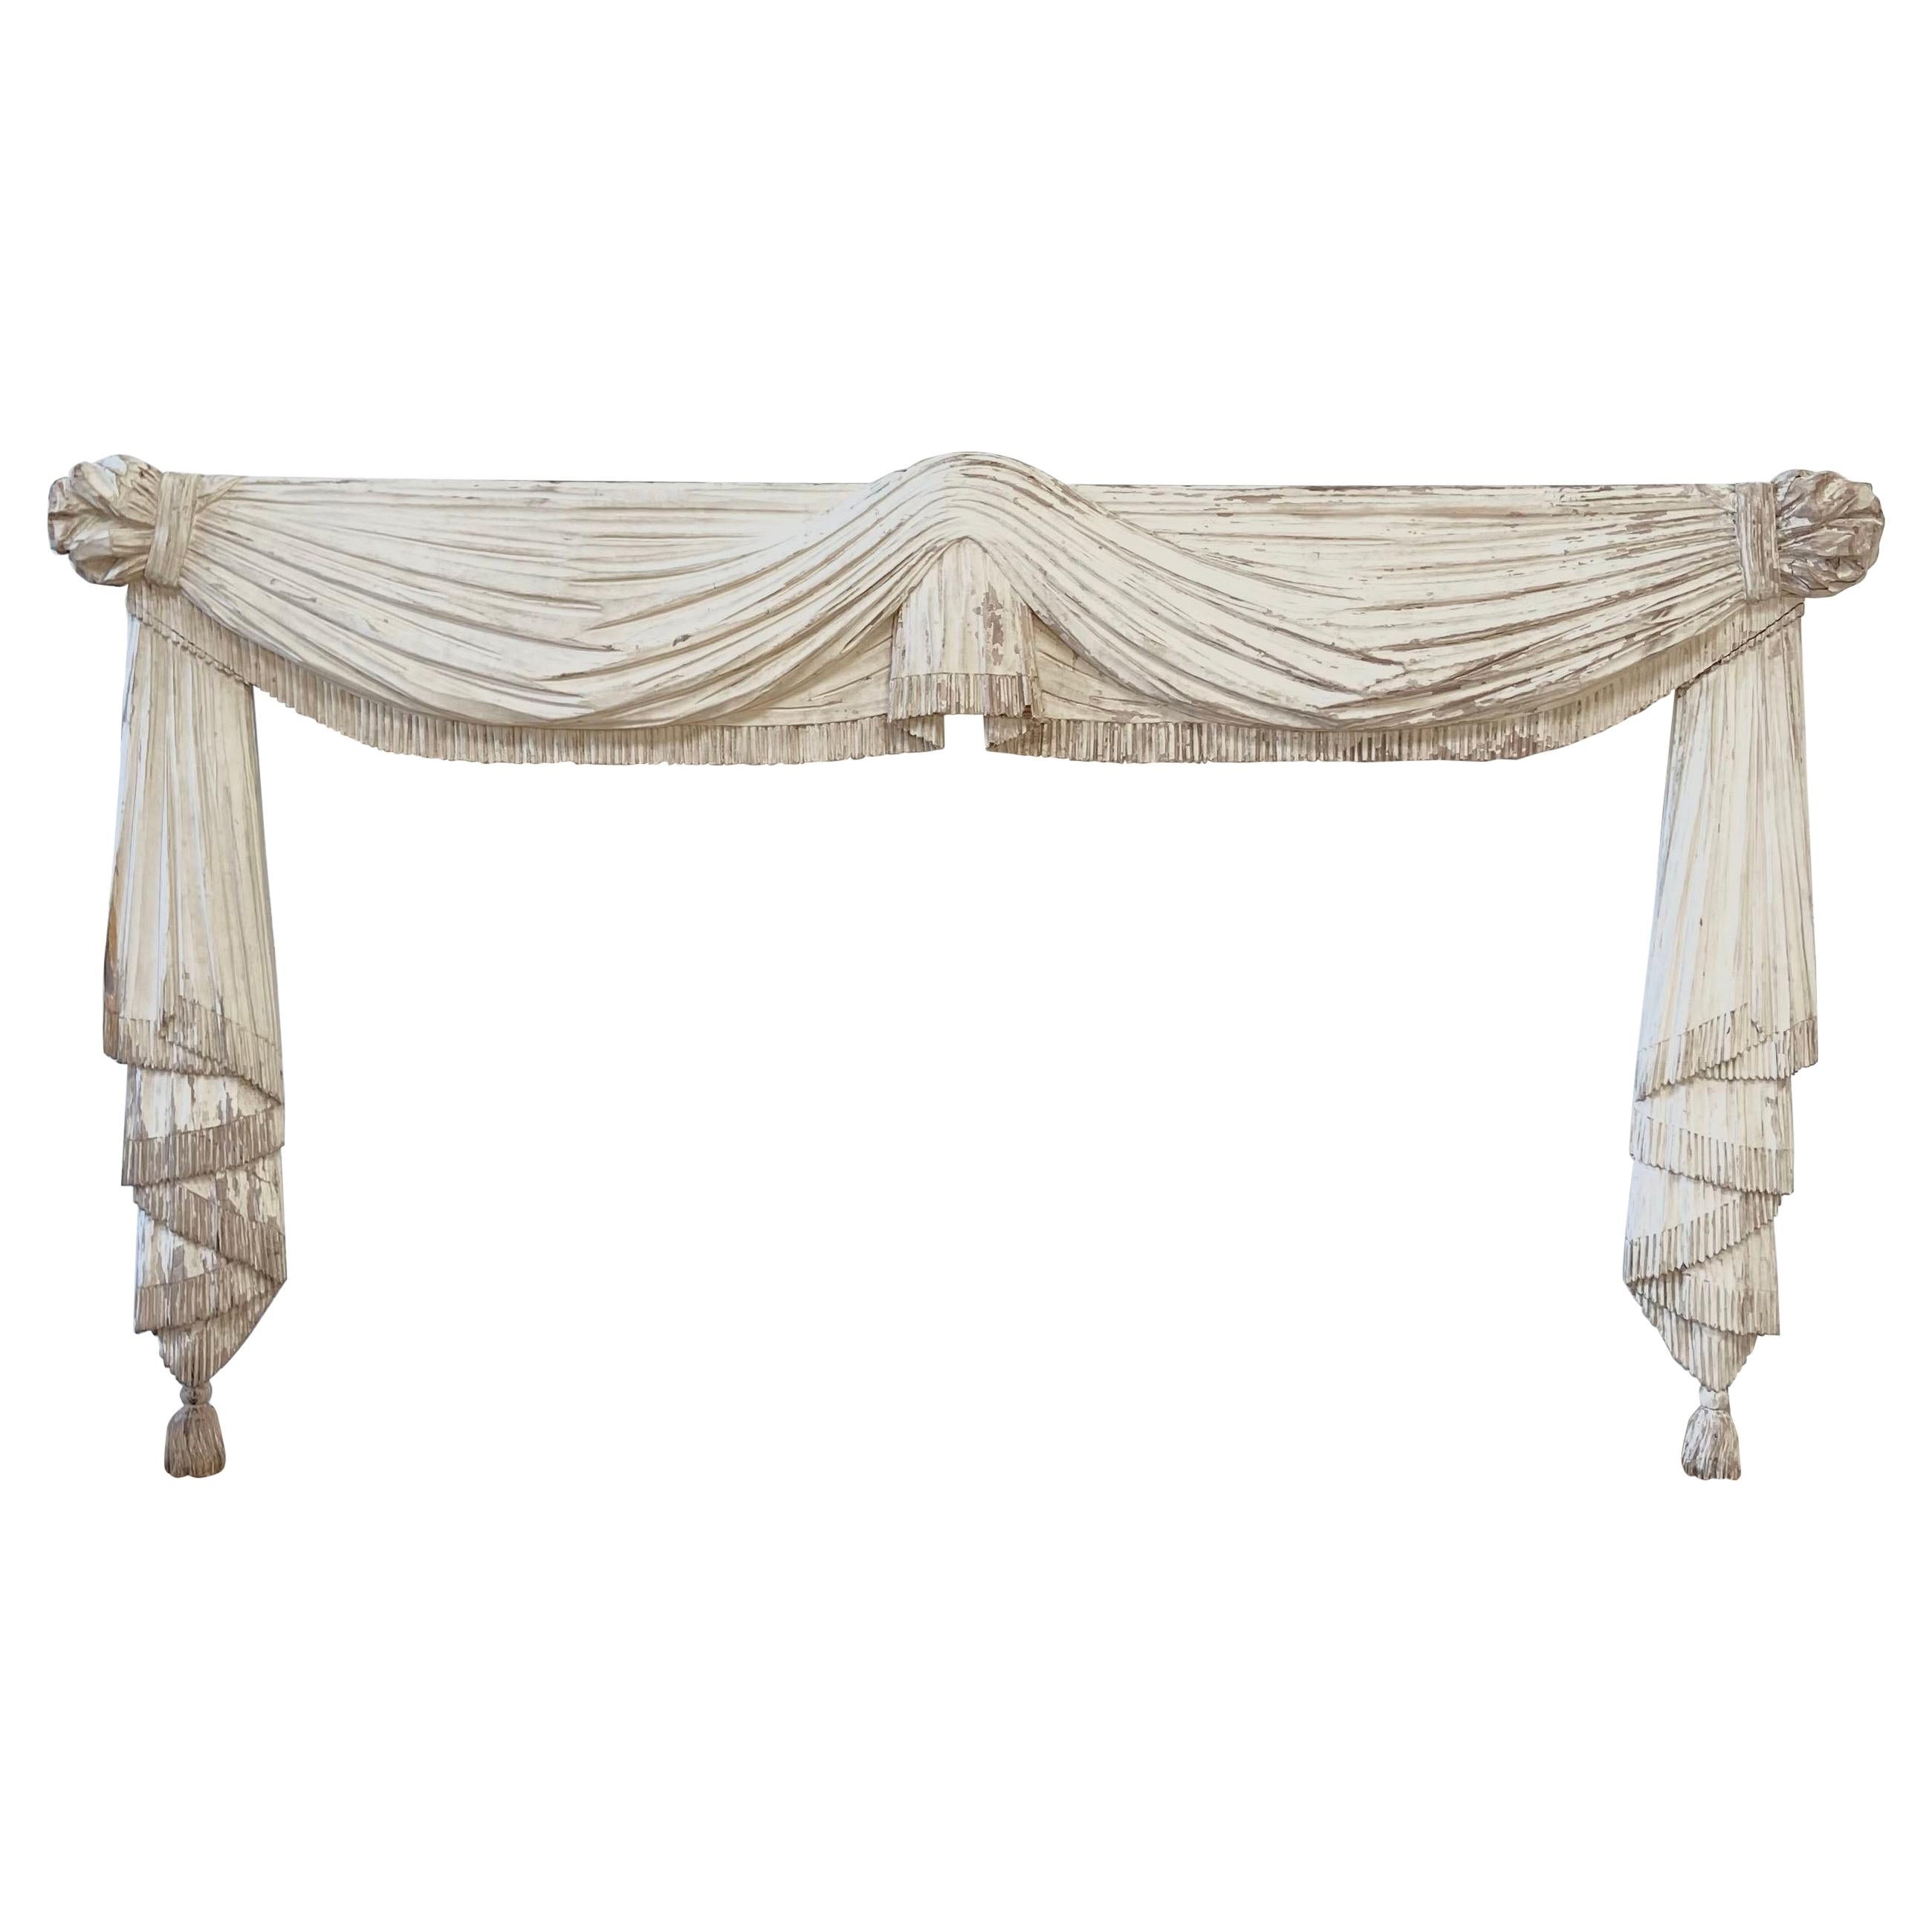 Antique Hand Carved Architectural Header or Canopy